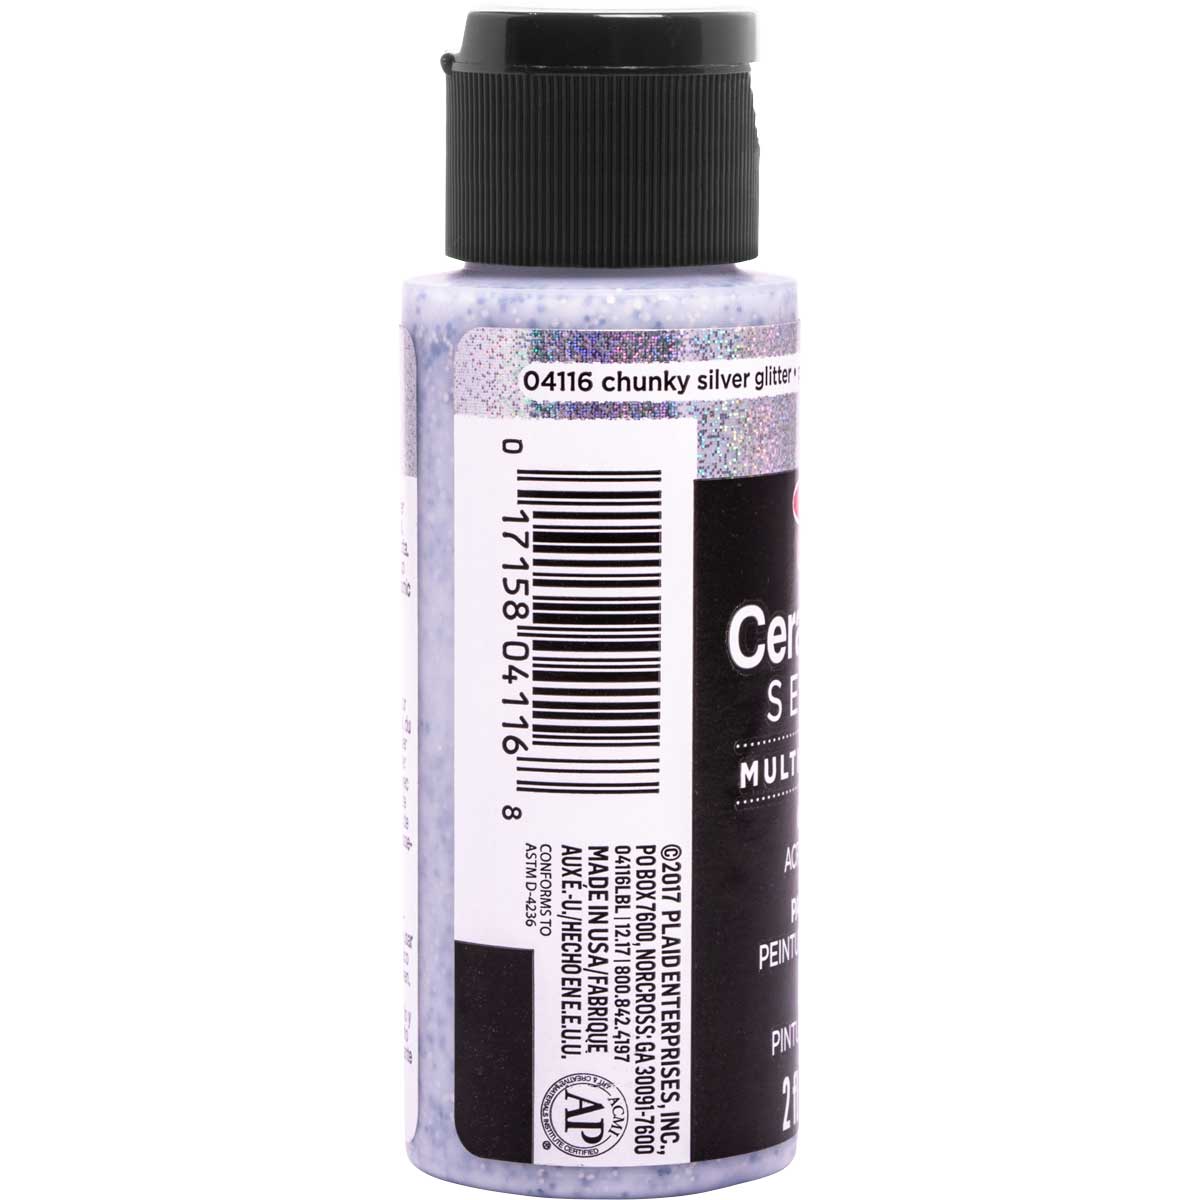 Delta Ceramcoat ® Select Multi-Surface Acrylic Paint - Glitter - Chunky Silver, 2 oz. - 04116